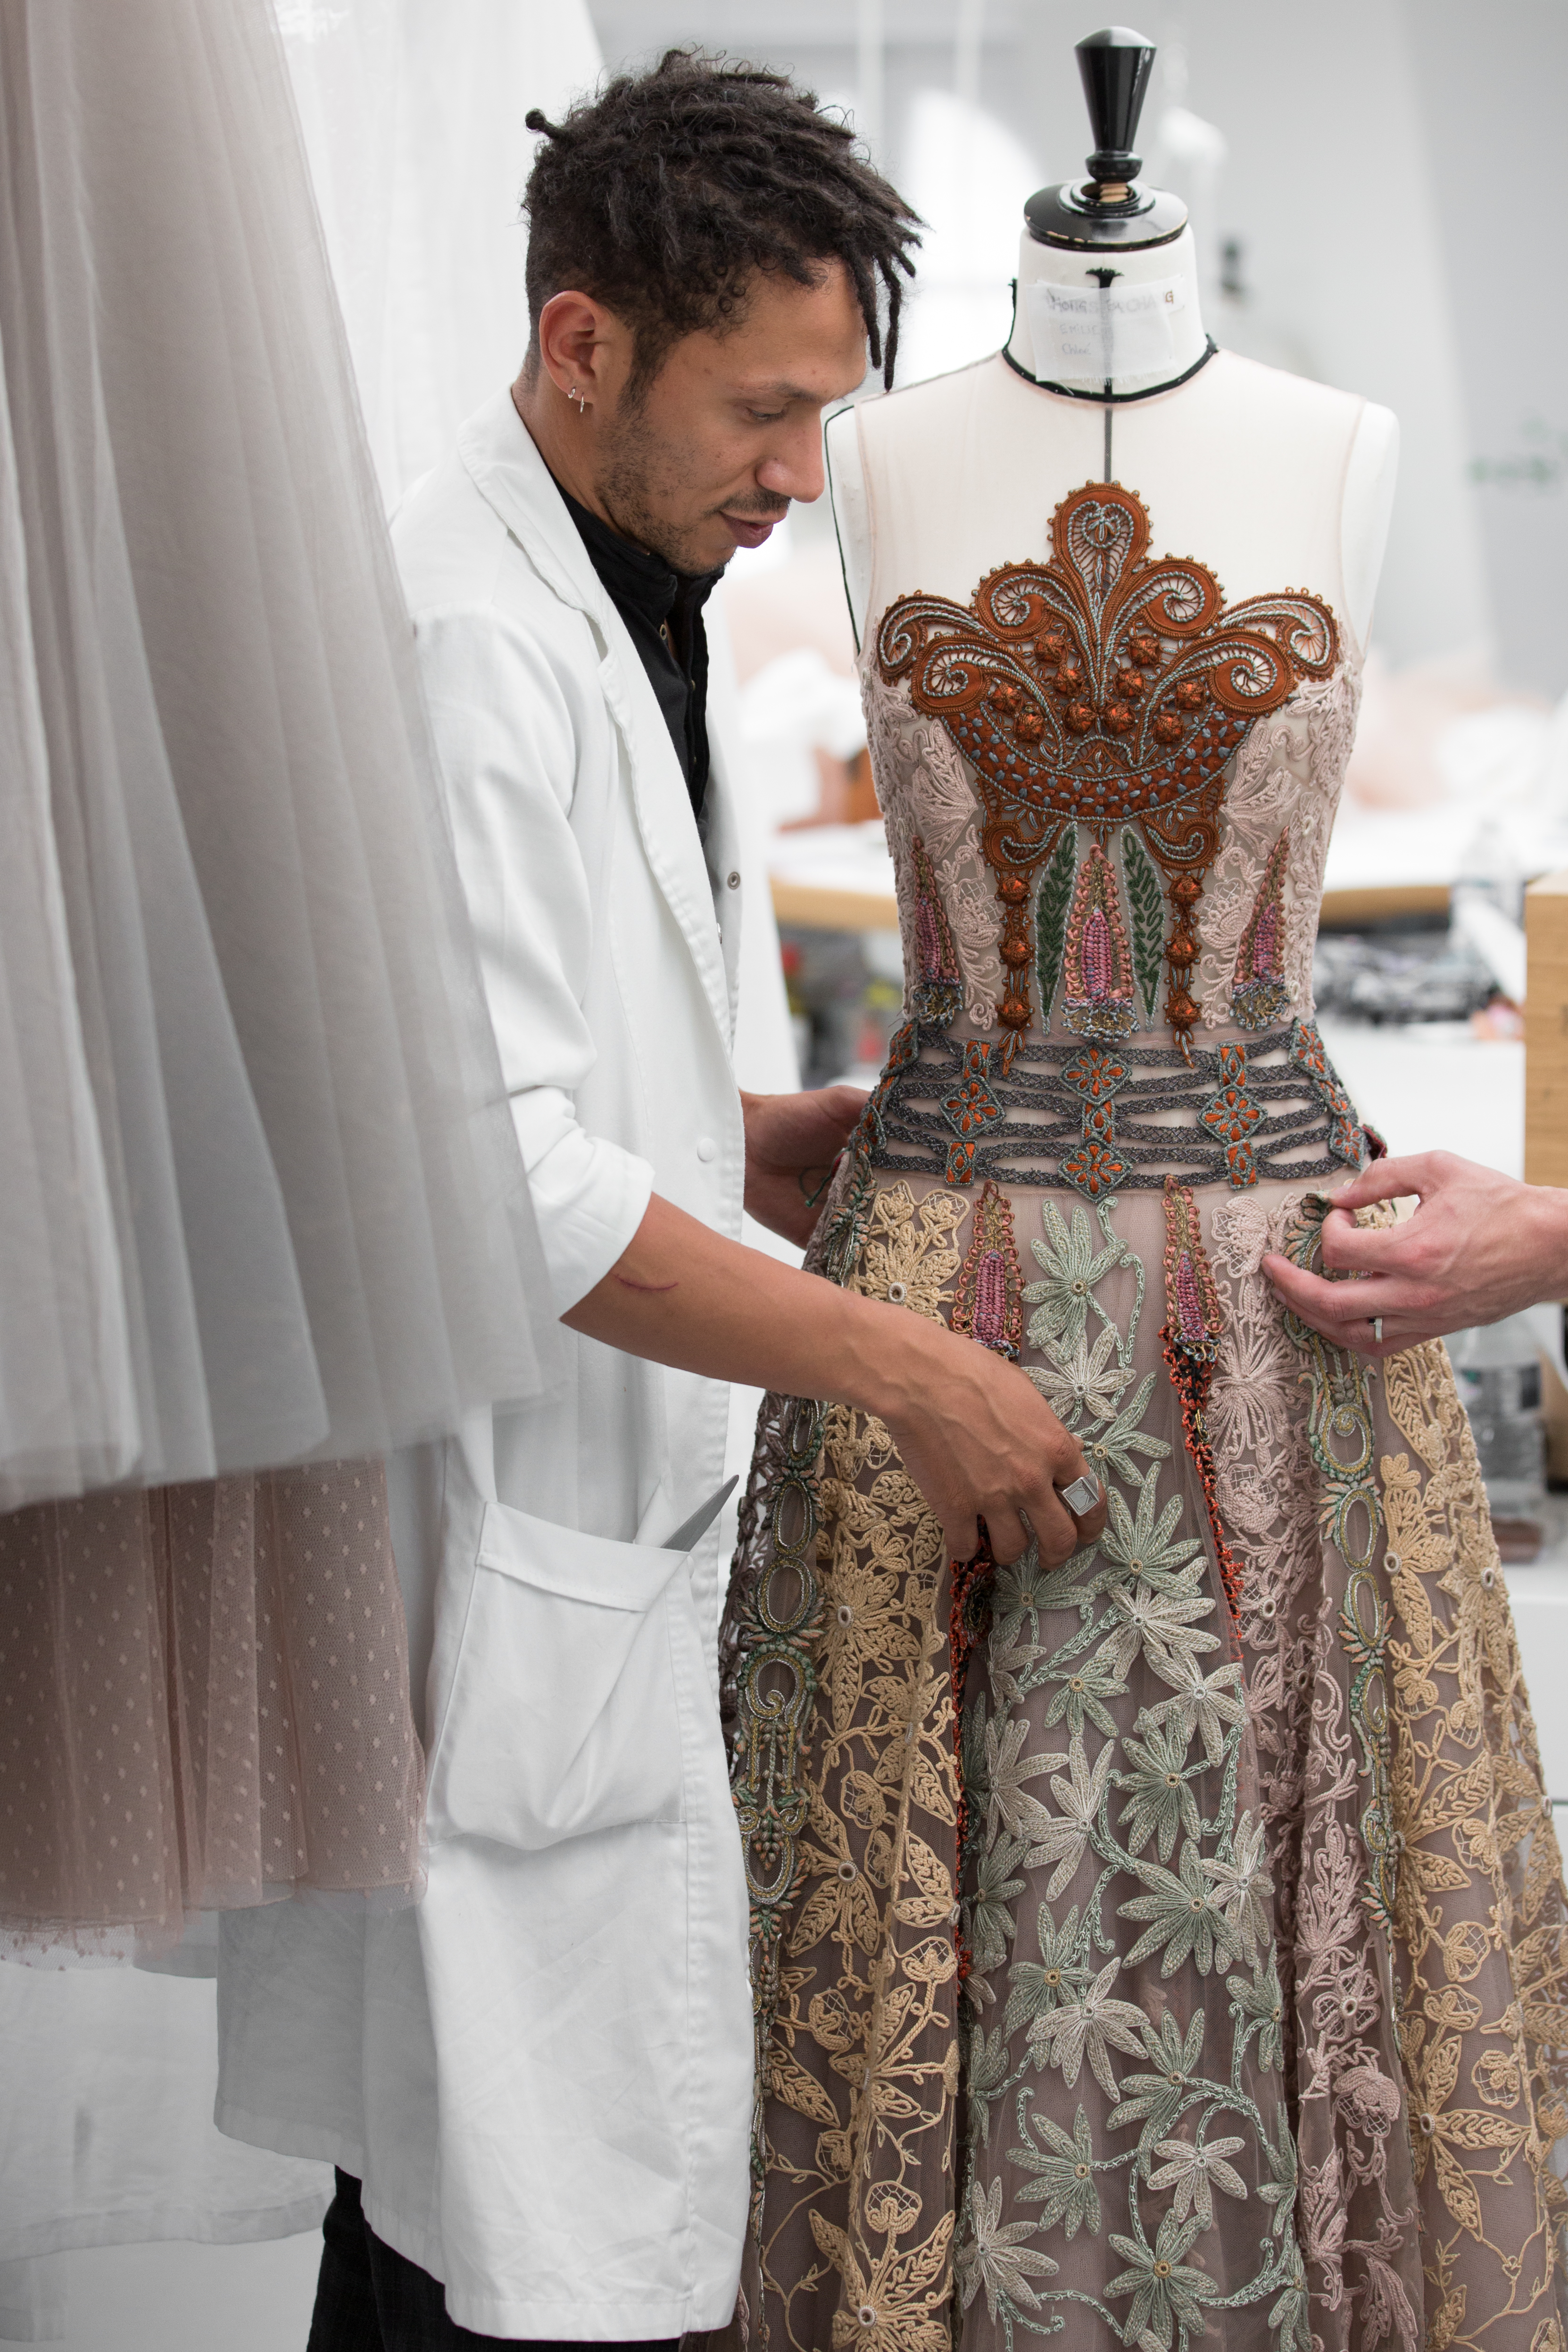 Inside the Dior atelier, image courtesy of Dior